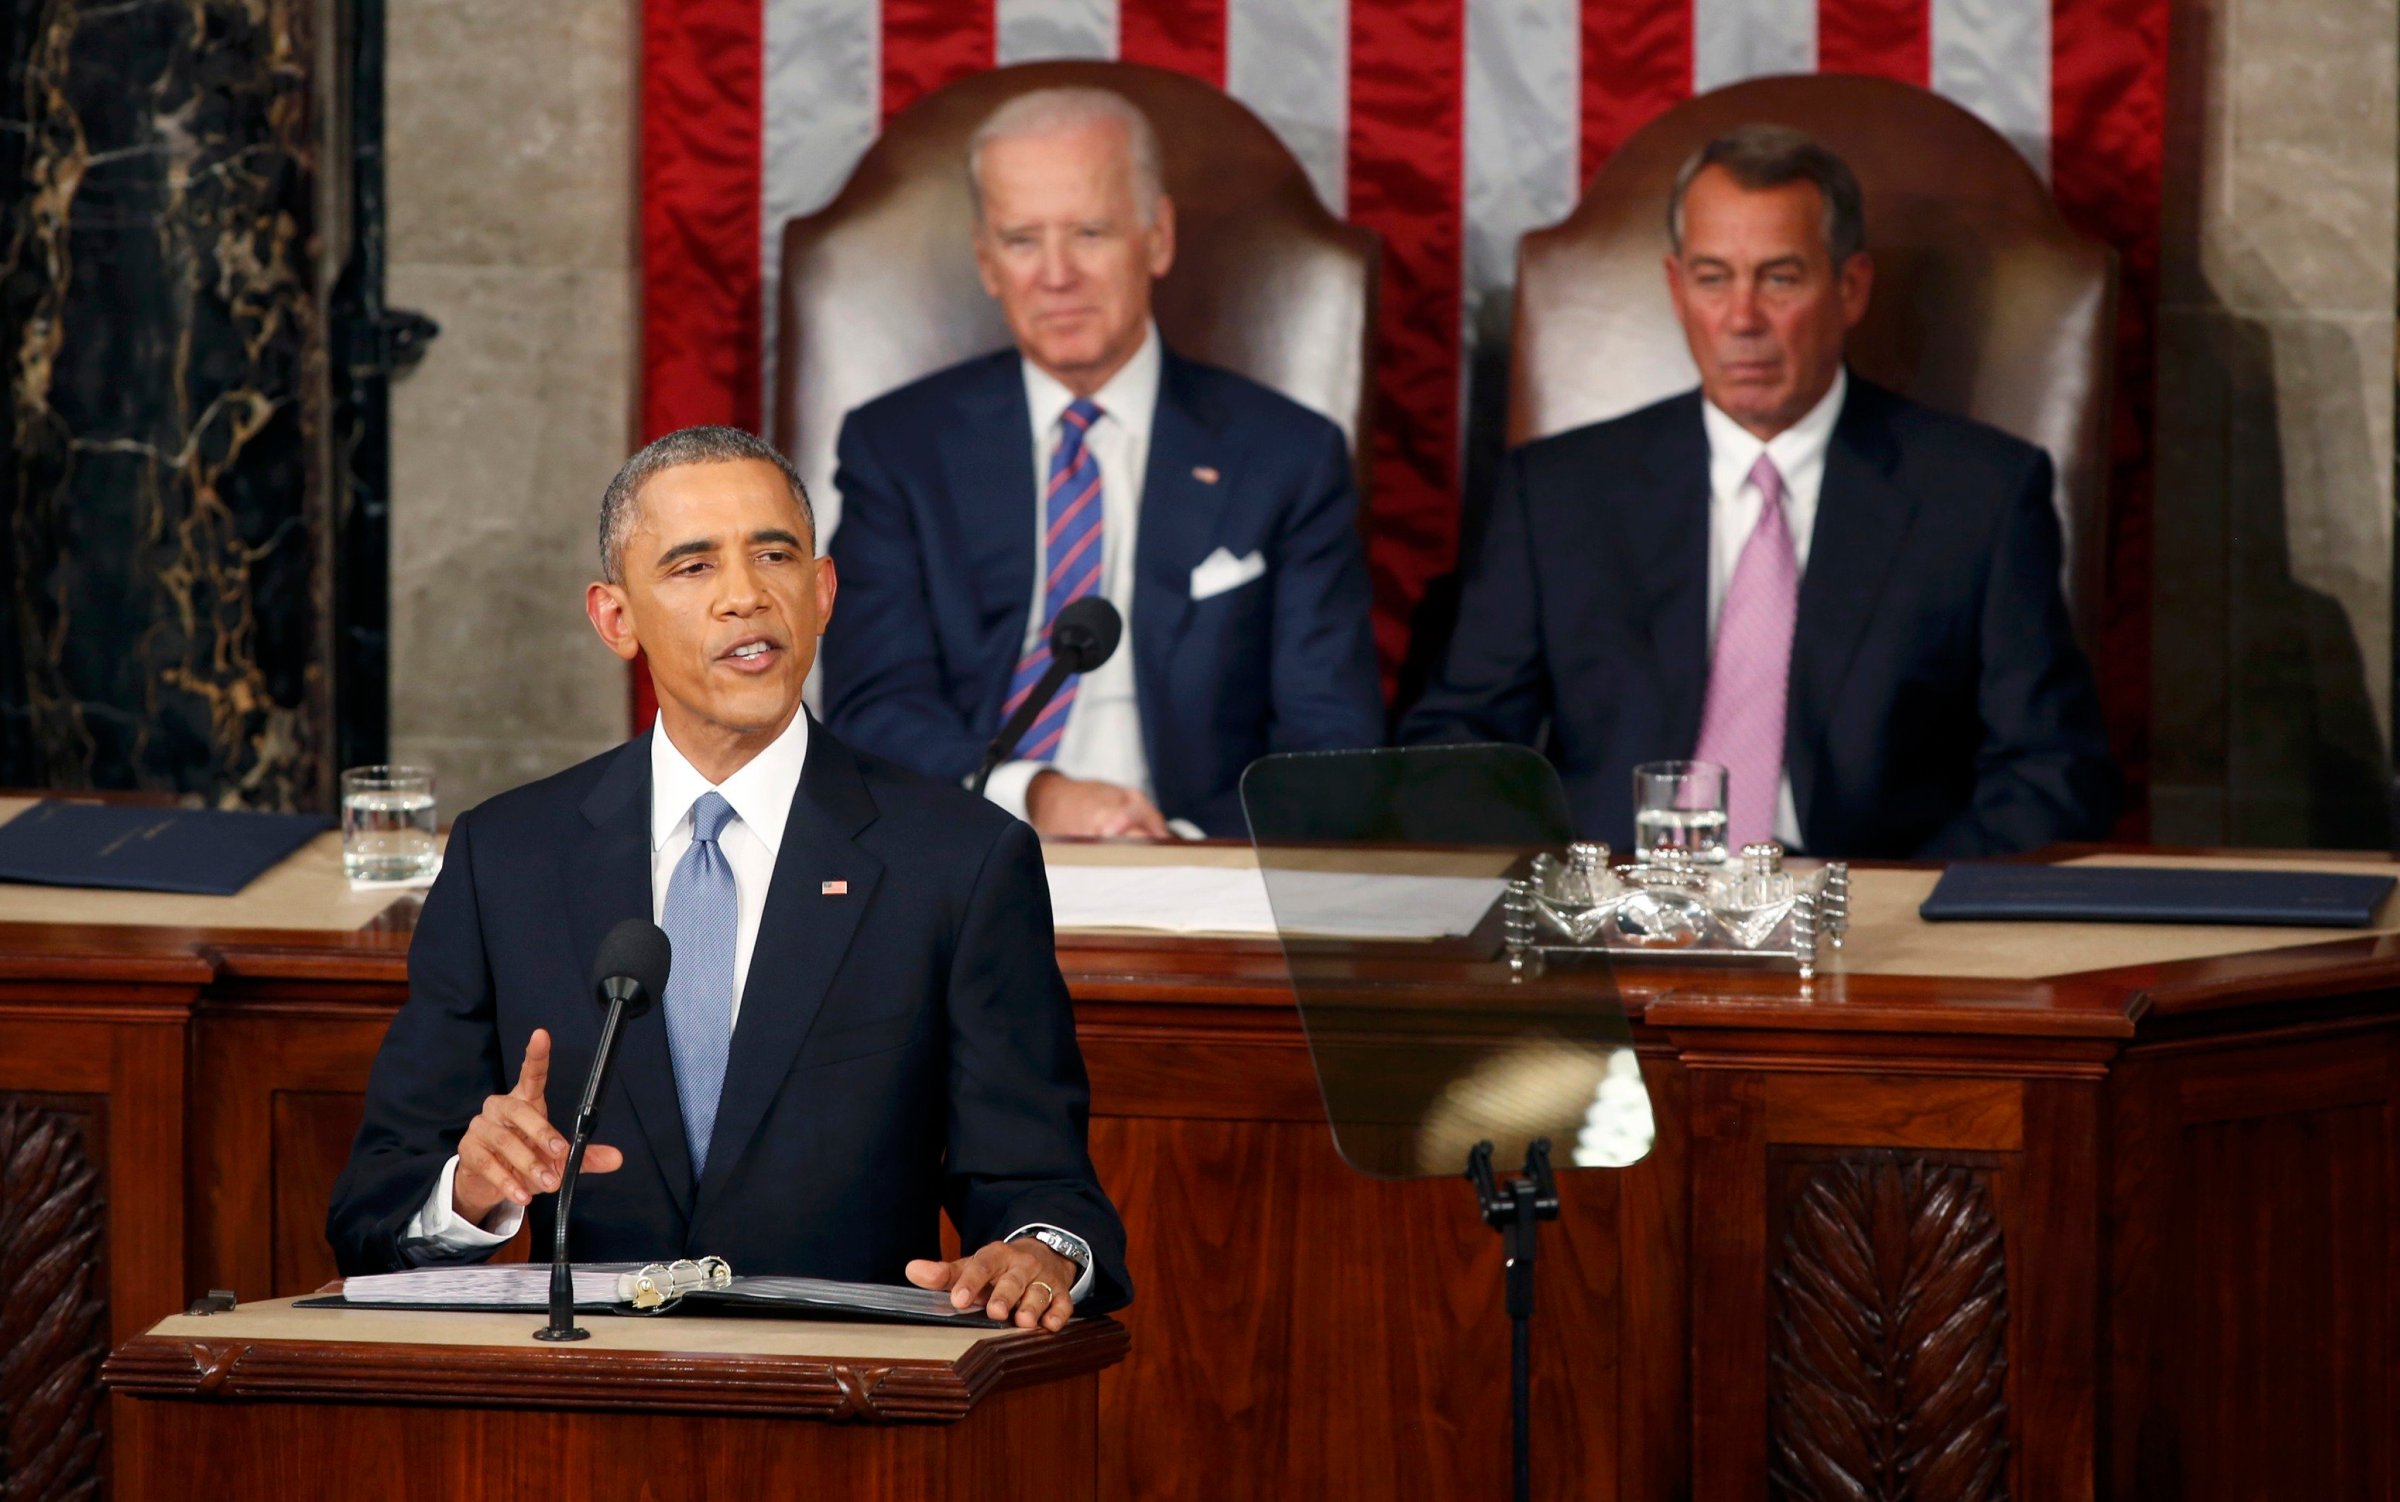 U.S. Vice President Joe Biden and Speaker of the House John Boehner watch as U.S. President Barack Obama delivers his State of the Union address to a joint session of the U.S. Congress on Capitol Hill in Washington on Jan. 20, 2015.